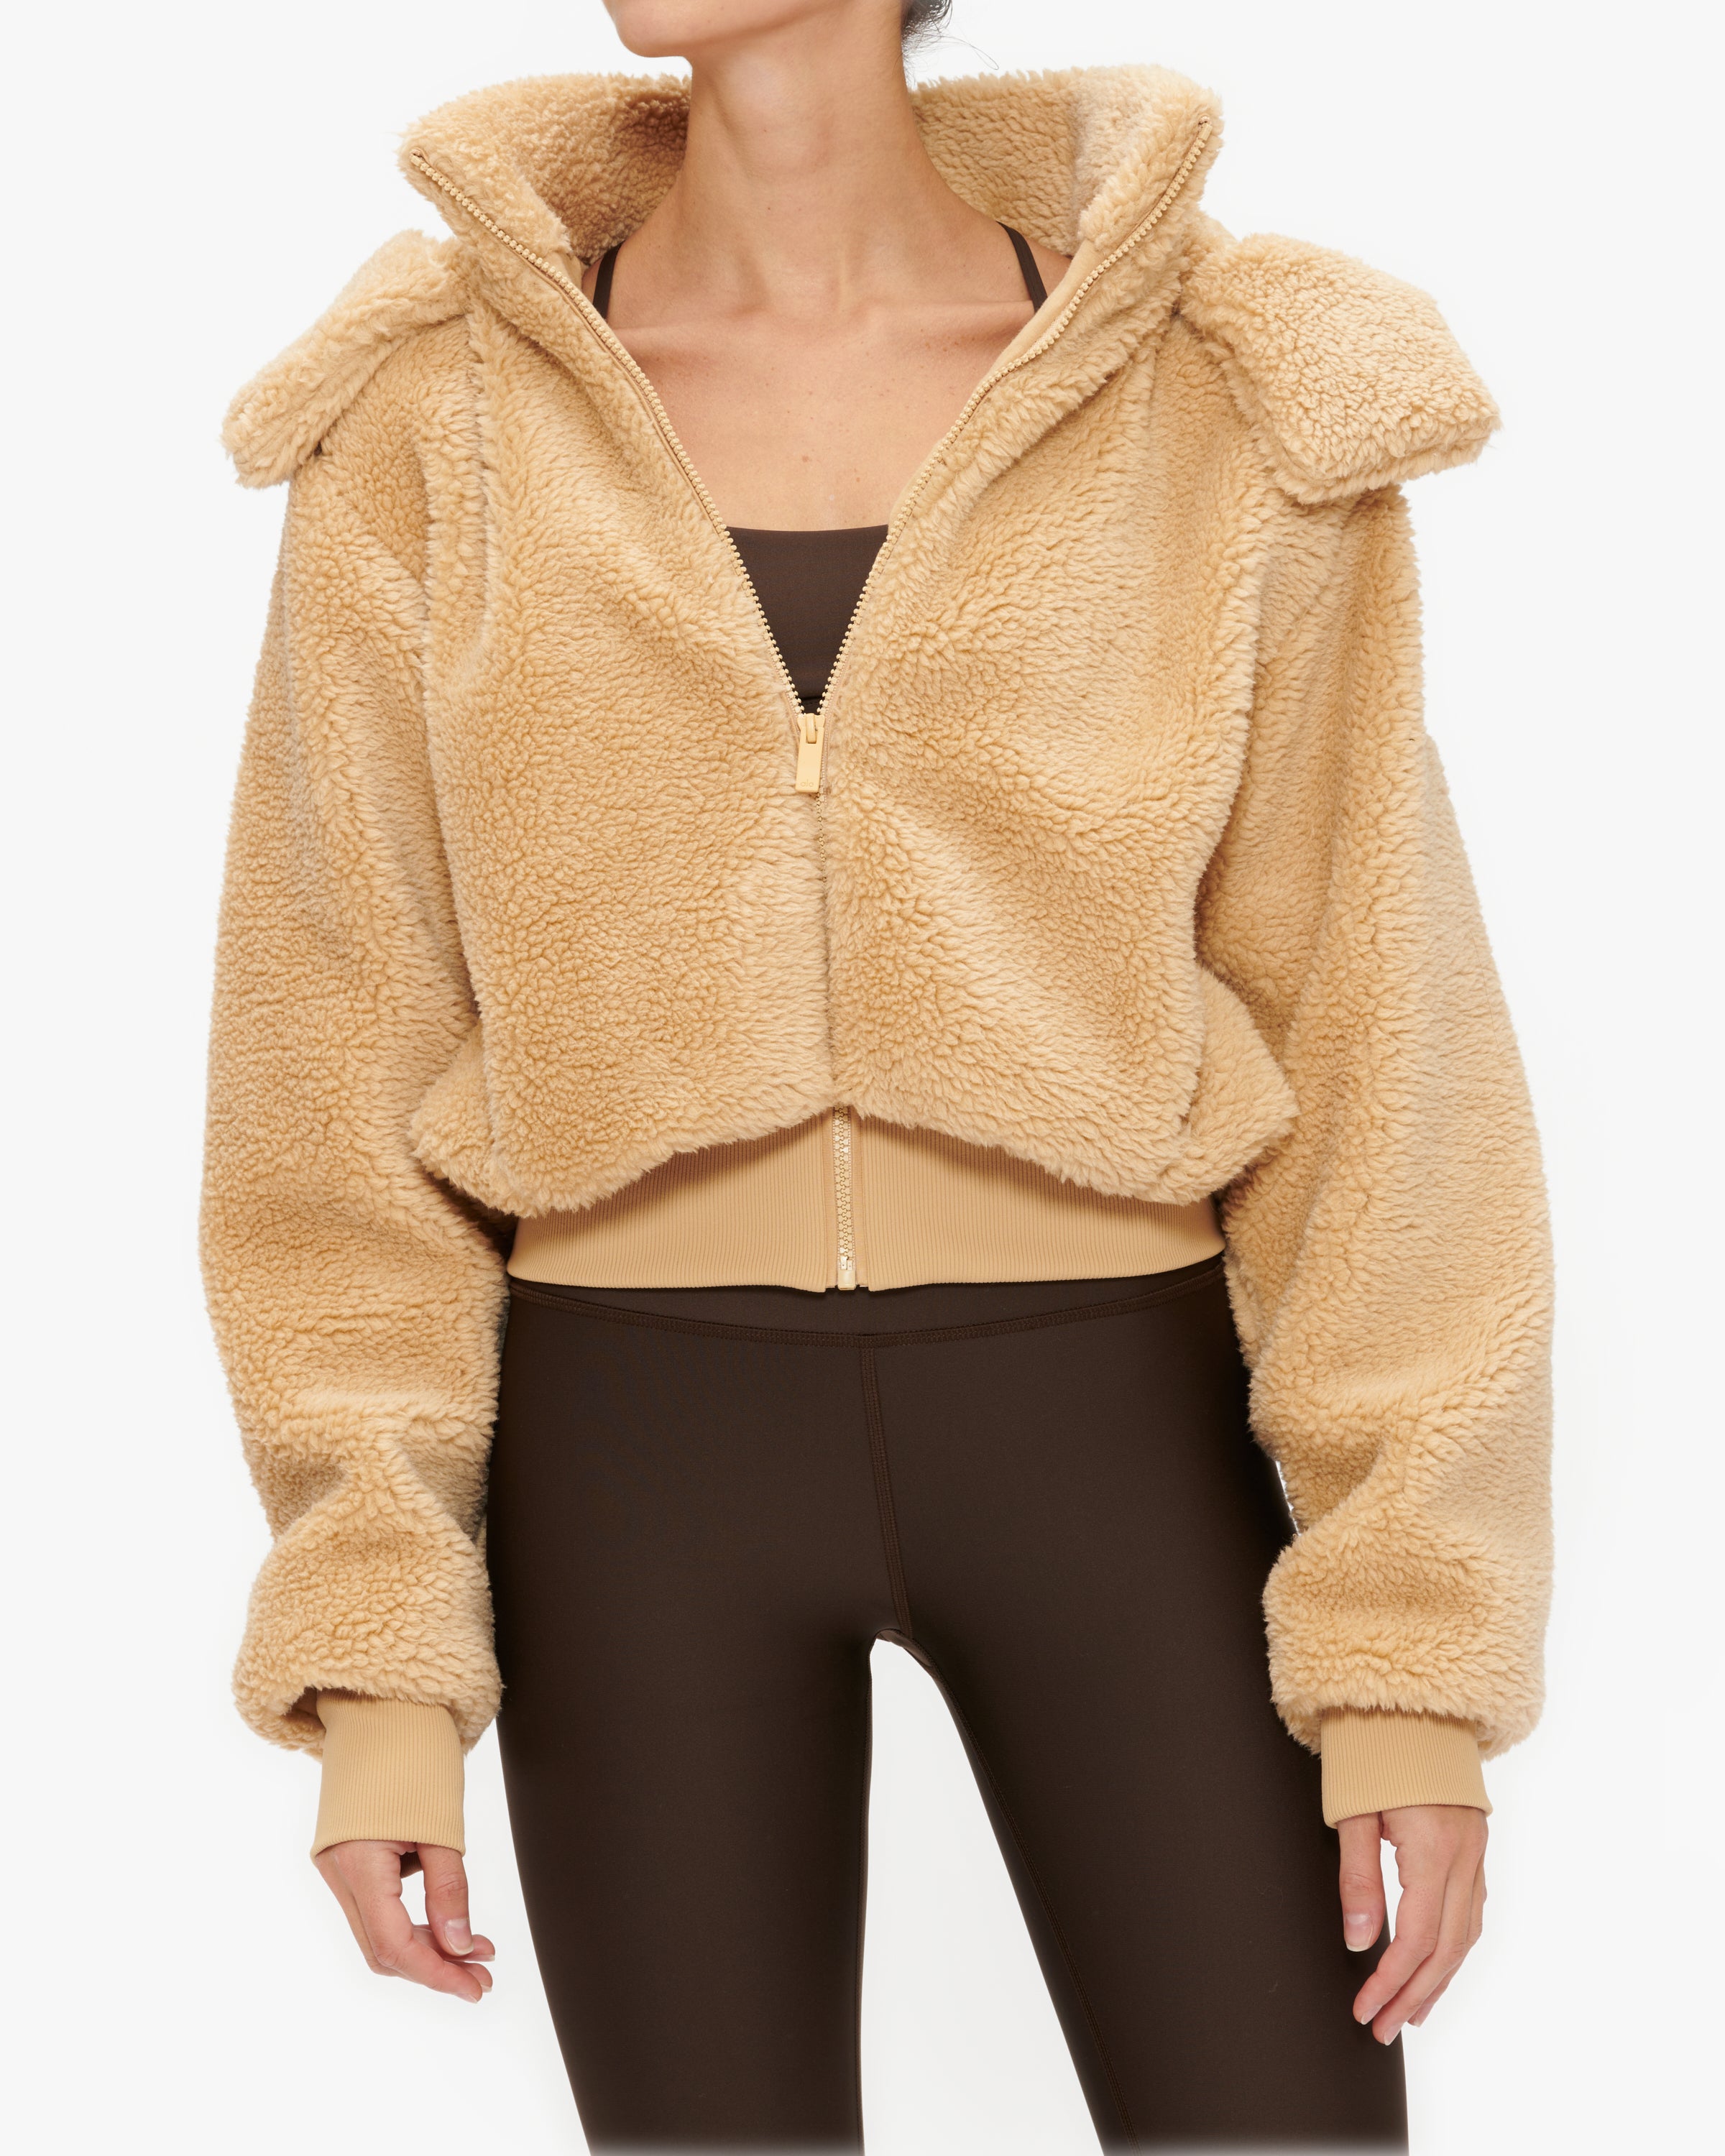 Stay Cozy and Stylish with our Foxy Sherpa Jacket